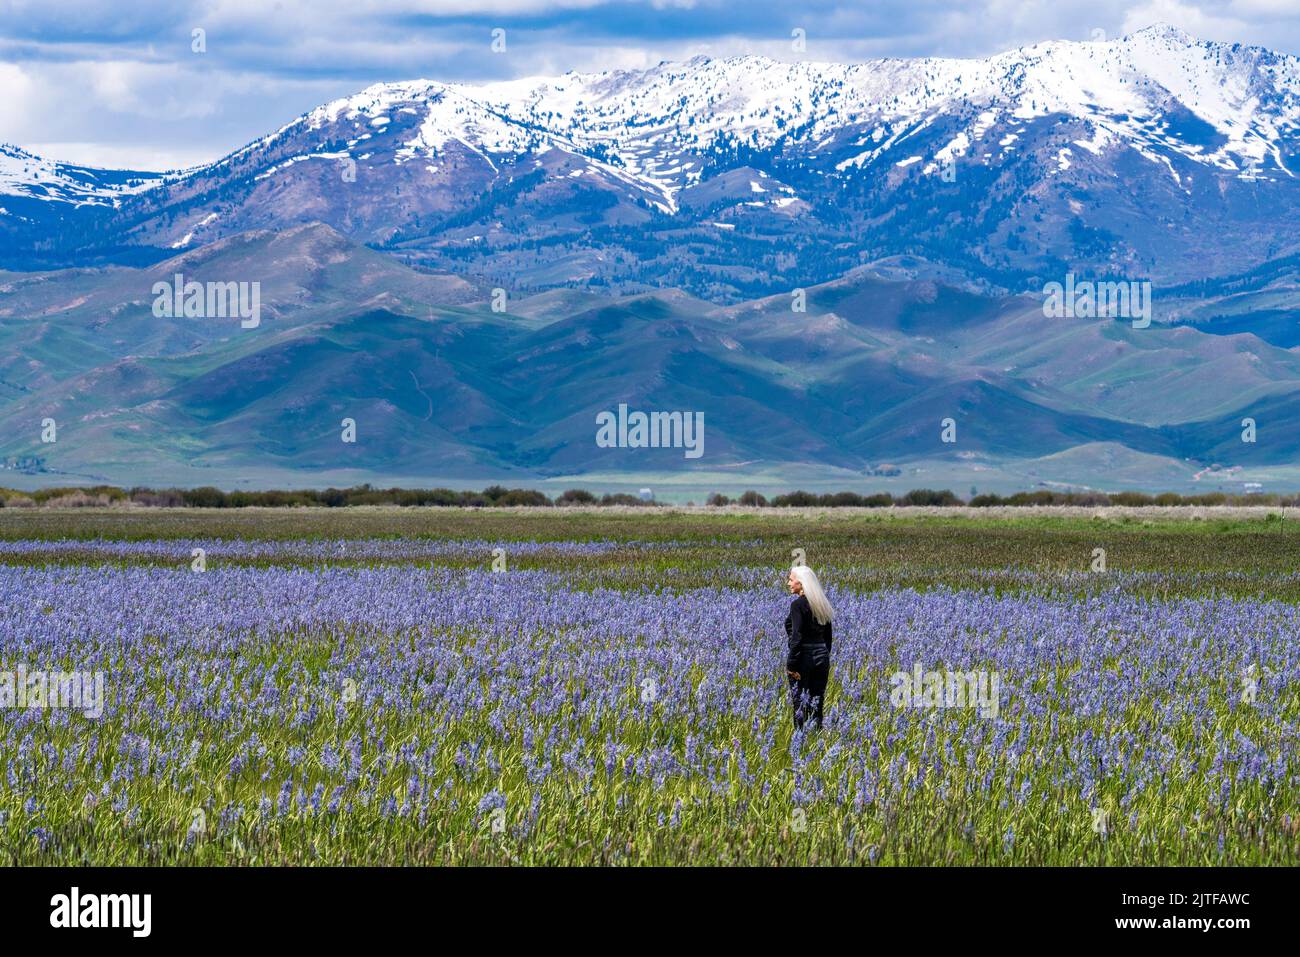 United States, Idaho, Fairfield, Senior woman standing in field of camas lilies Soldier Mountain in background Stock Photo